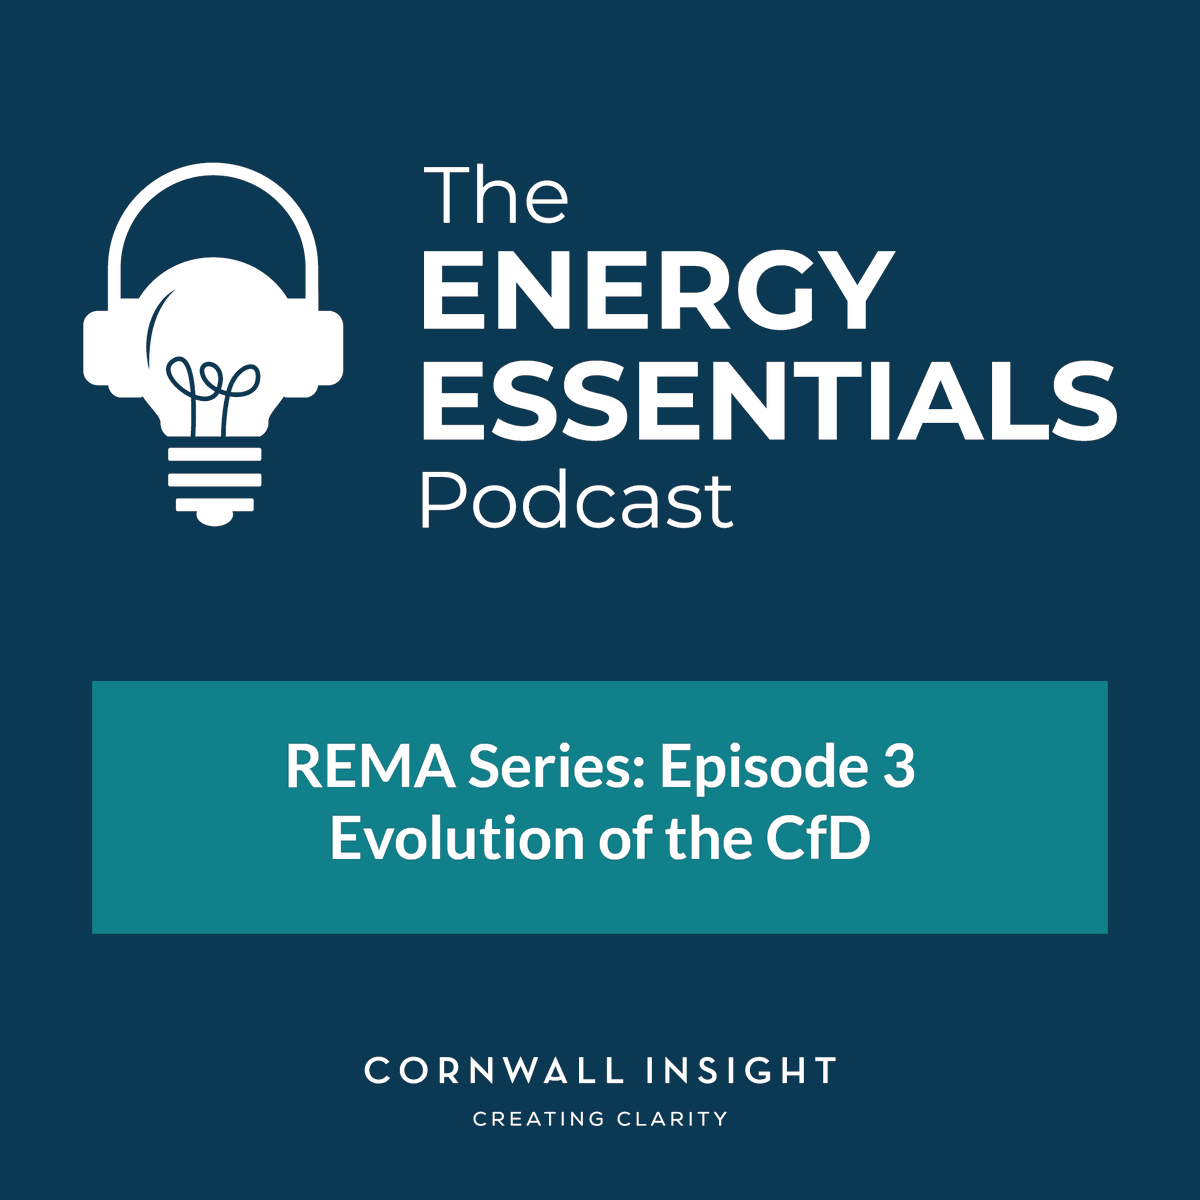 We just released Episode 3 of our latest REMA Podcast Series, which focuses on the evolution of the Contracts for Difference (CfD) scheme as part of the Review of Electricity Market Arrangements (REMA). CATALYST customers can listen here: catalyst.cornwall-insight.com/product-archiv…